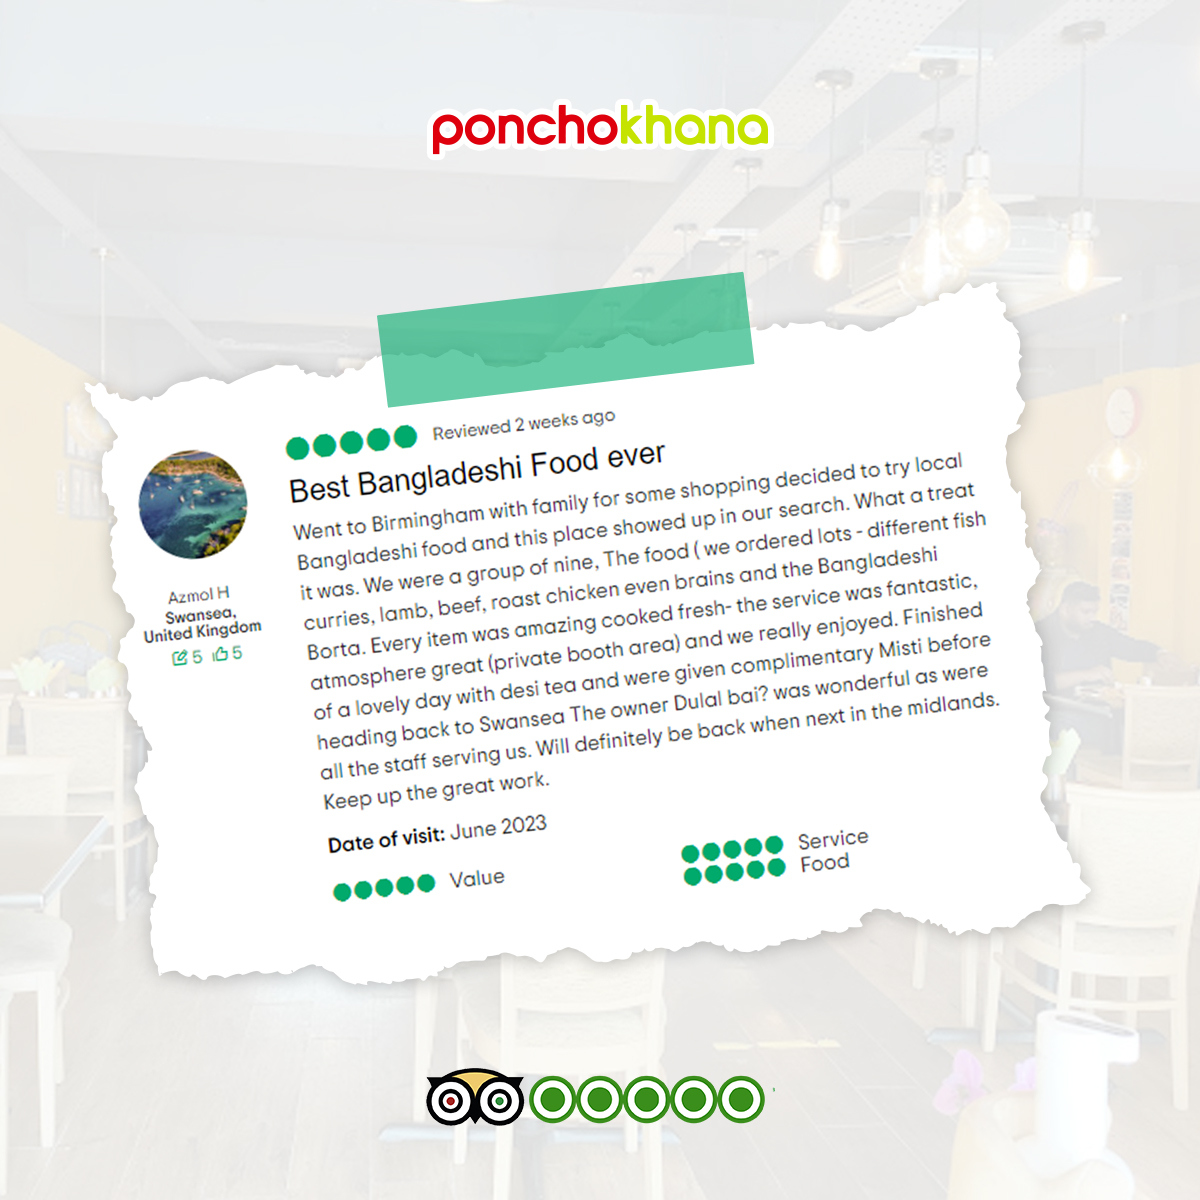 Dear Azmol,

Your honest review has made our day! Thank you for sharing your delightful experience with us! ❤🙏        

#happycustomers #ponchokhana #indian #Birmingham #bestrestaurant #bestchef #ensuressafety